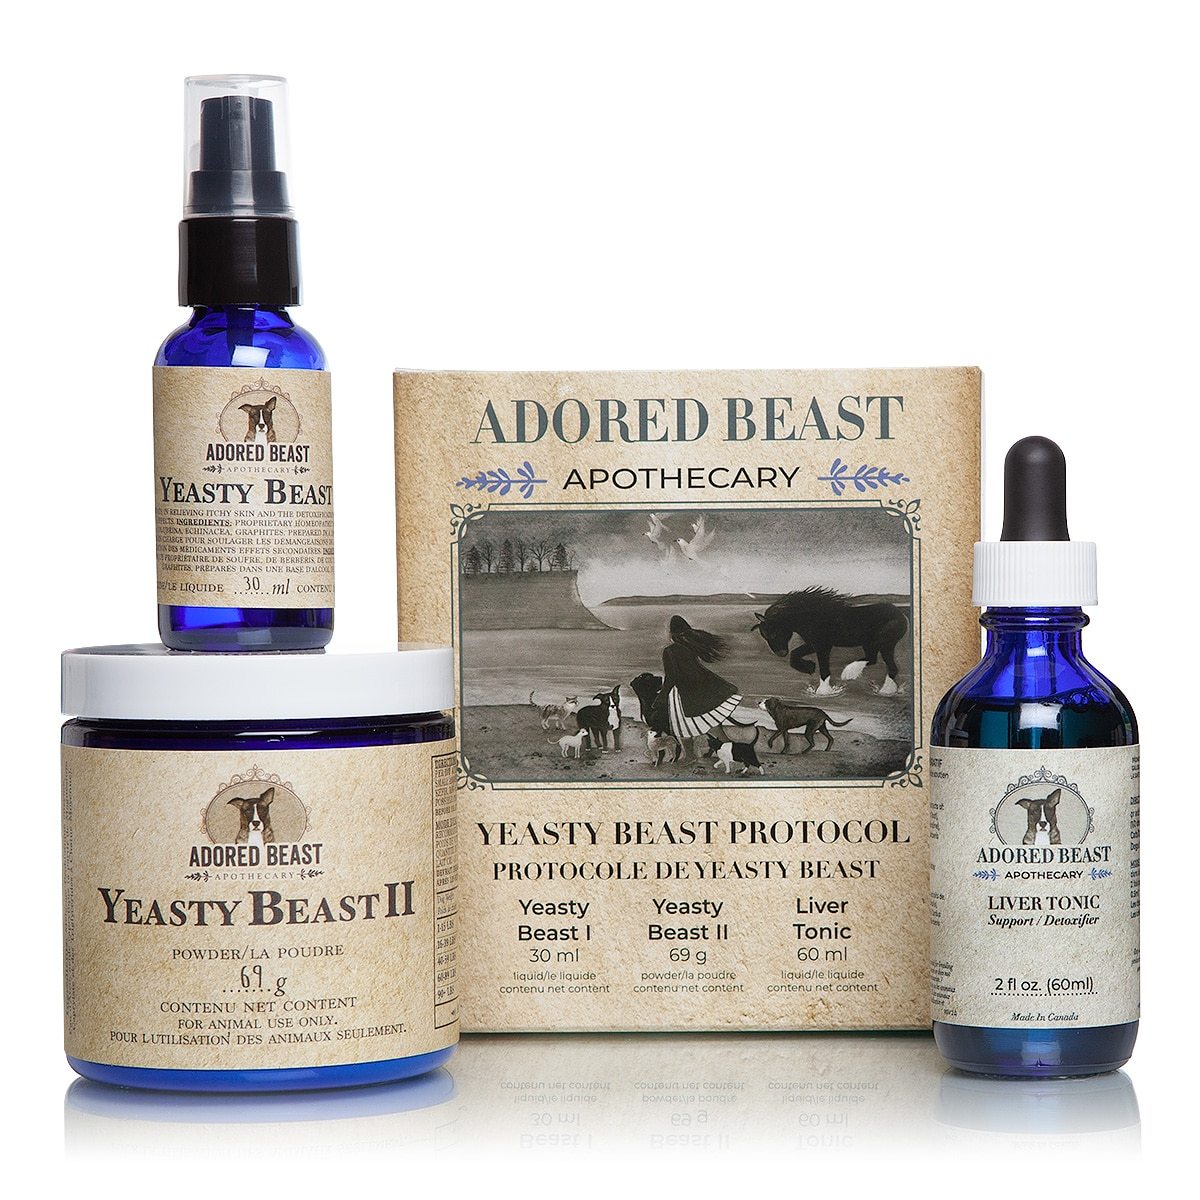 Yeasty Beast Protocol - 3 product kit - Adored Beast Apothecary